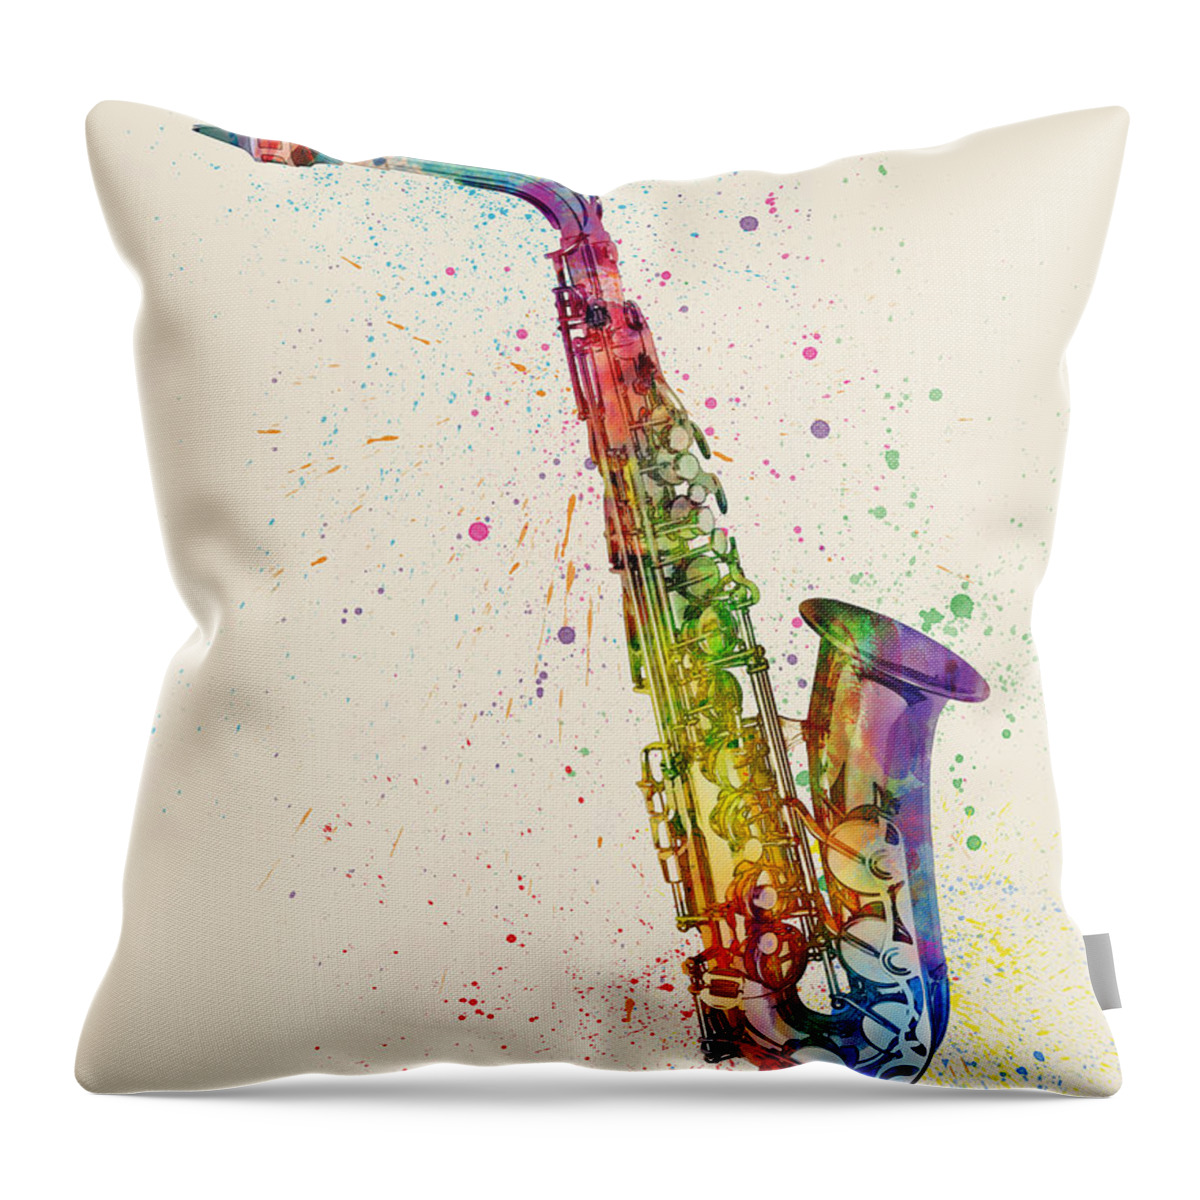 Saxophone Throw Pillow featuring the digital art Saxophone Abstract Watercolor by Michael Tompsett